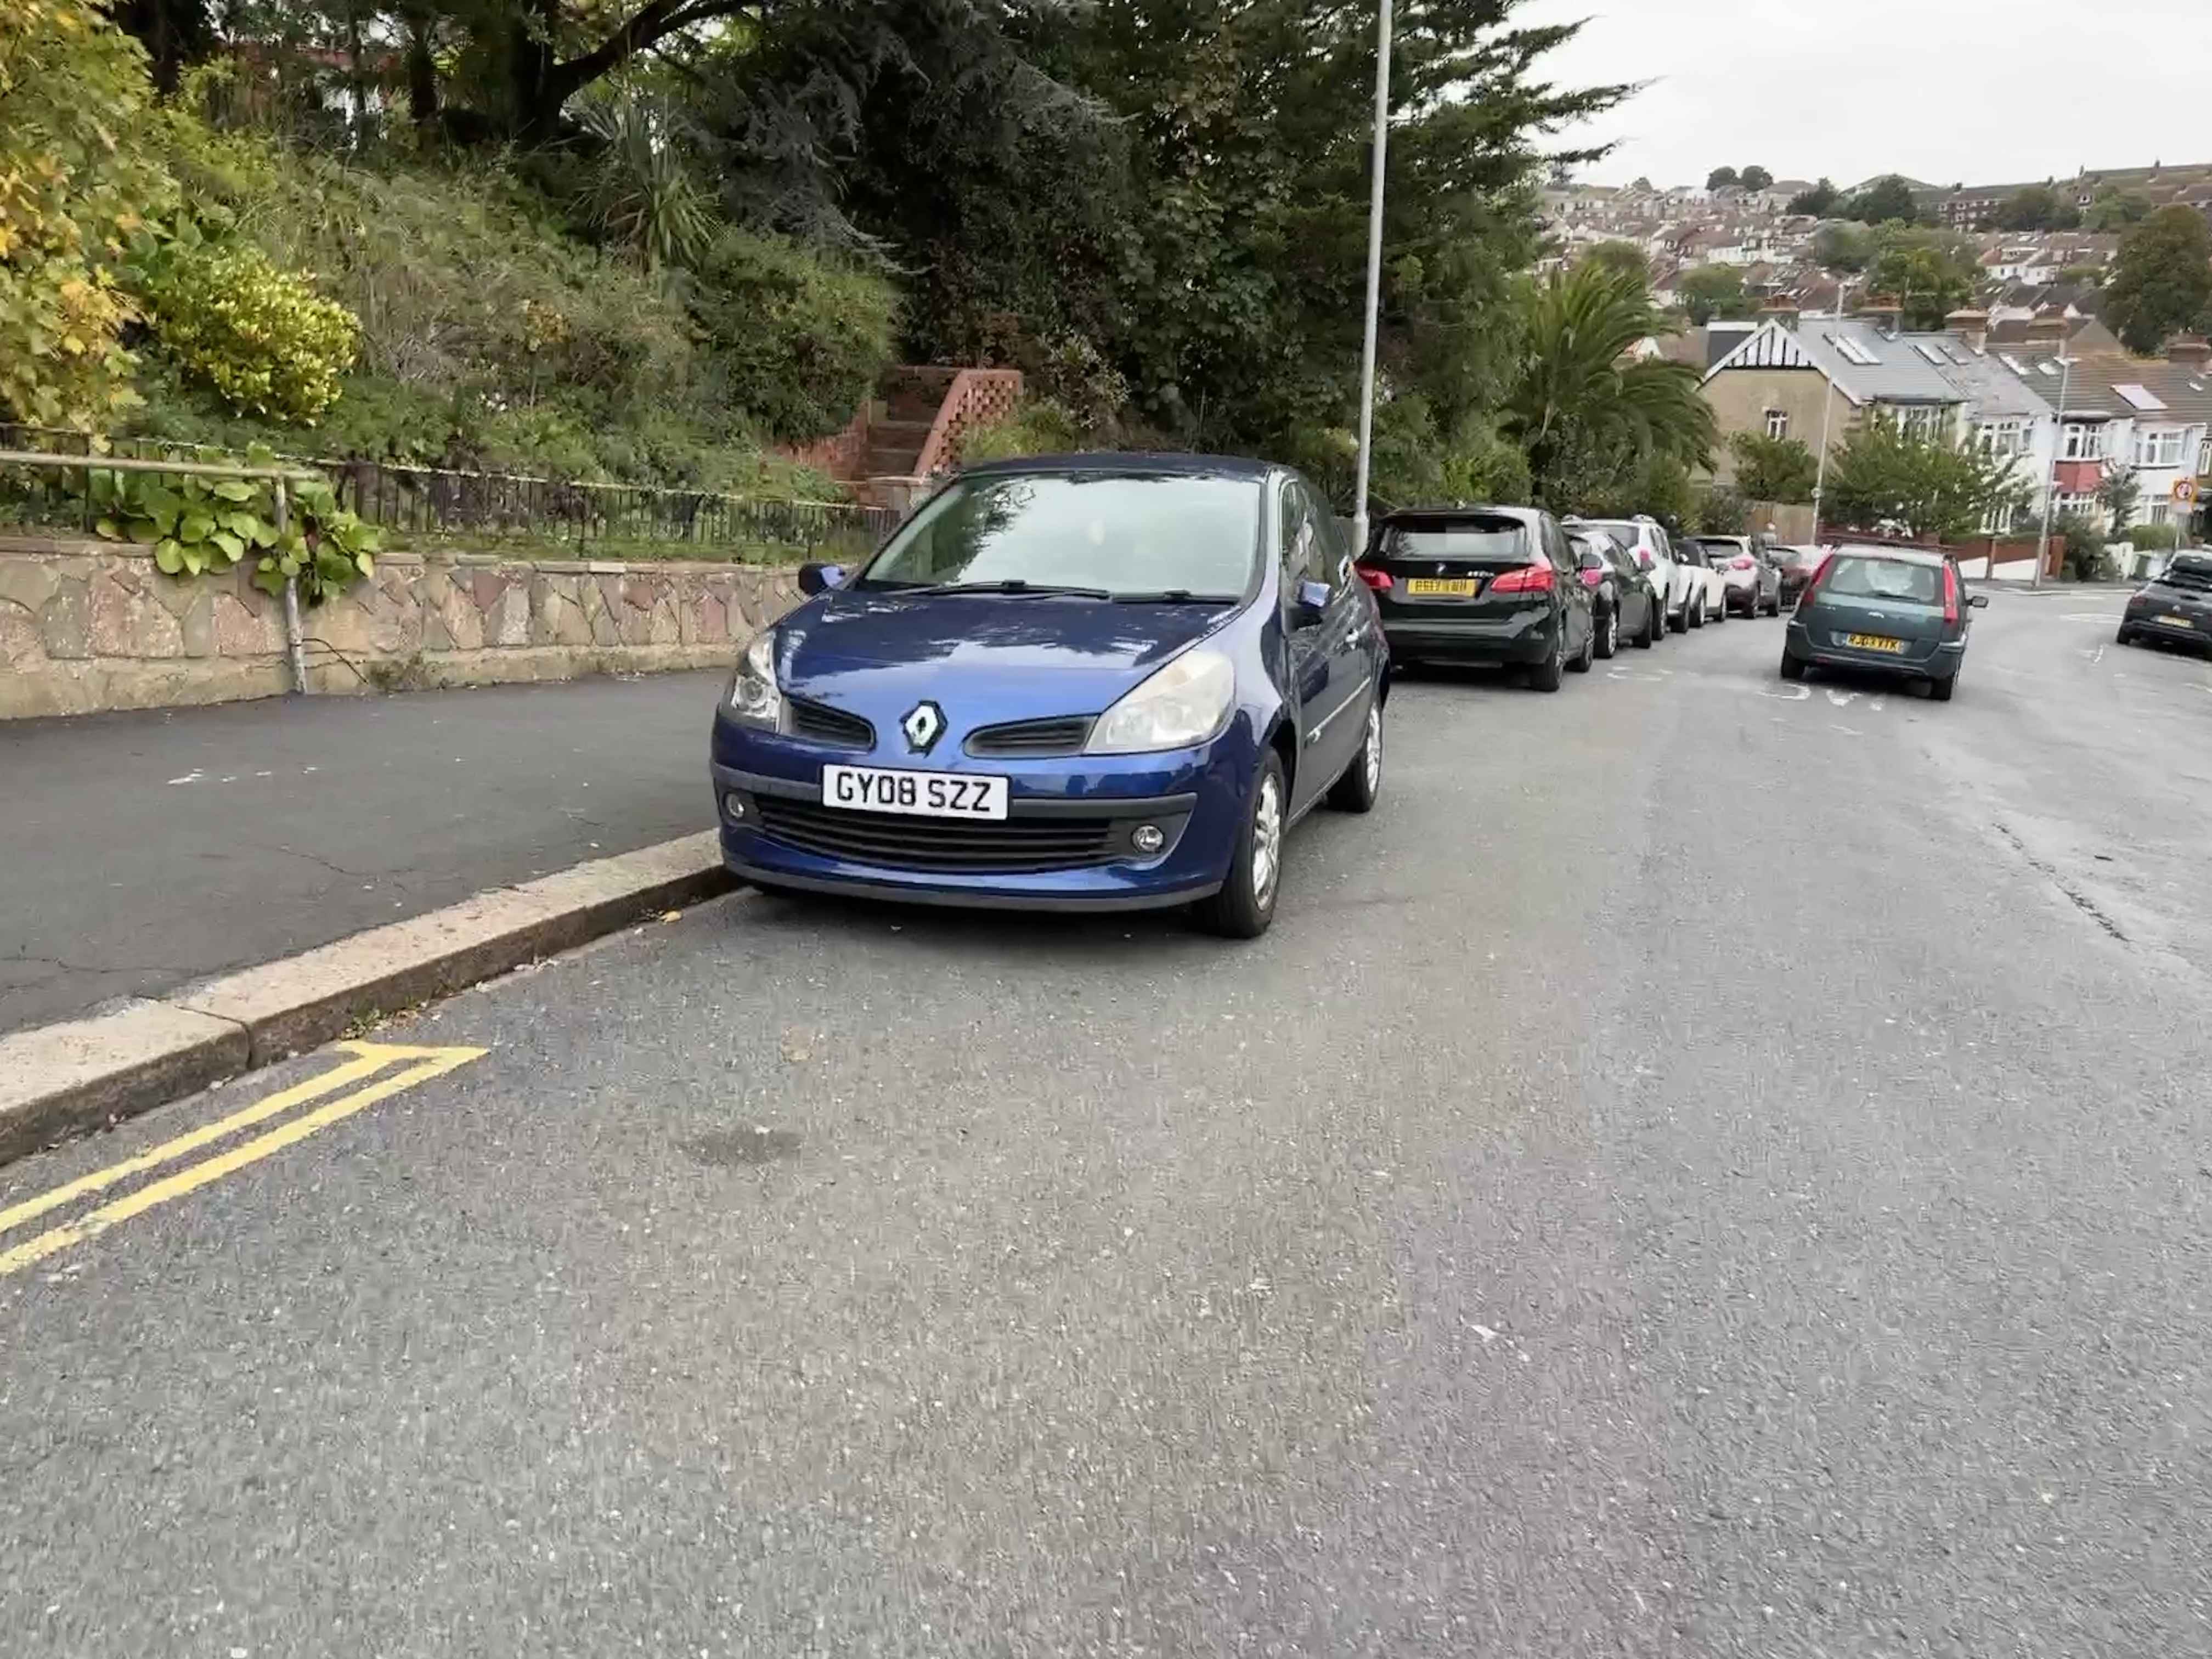 Photograph of GY08 SZZ - a Blue Renault Clio parked in Hollingdean by a non-resident. The first of two photographs supplied by the residents of Hollingdean.